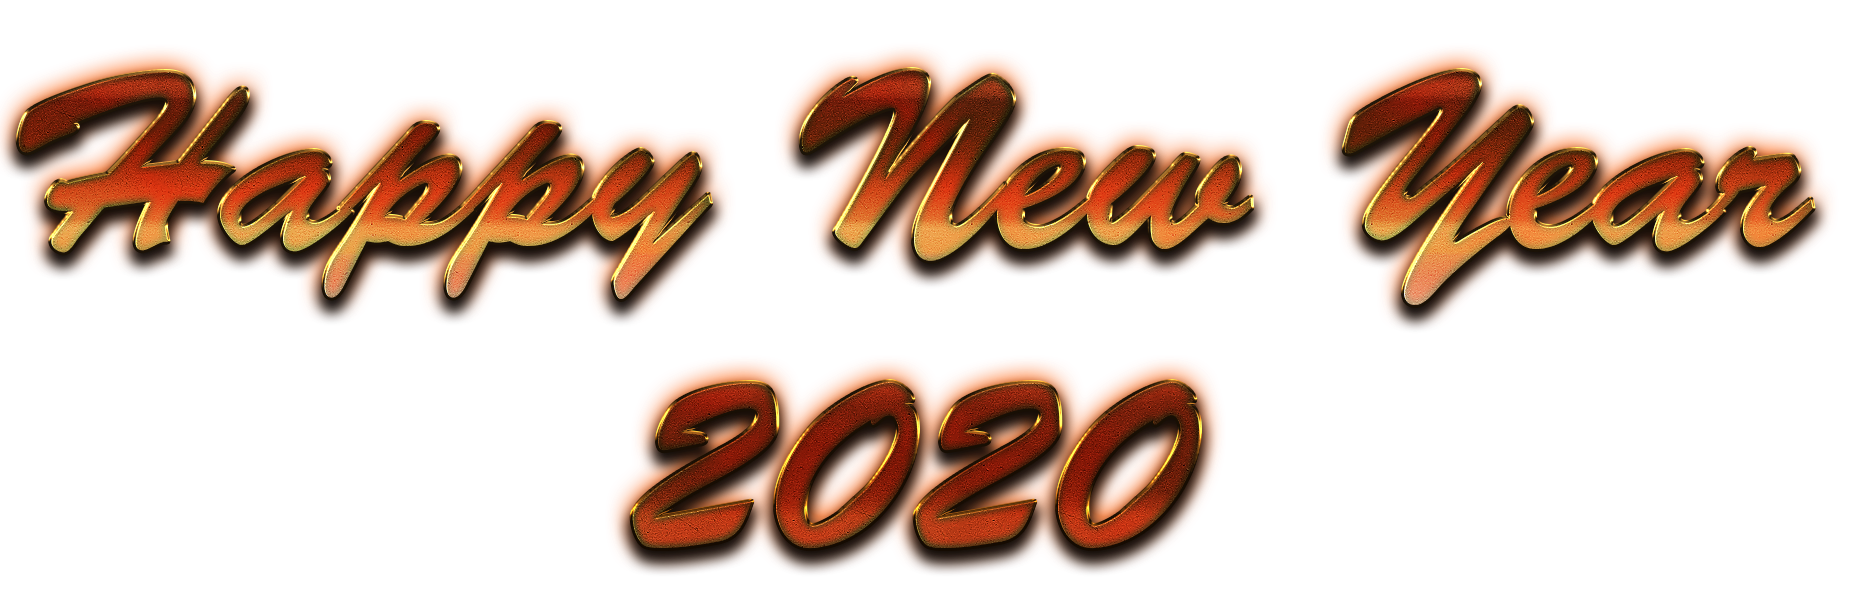 Happy New Year 2020 Transparent Image